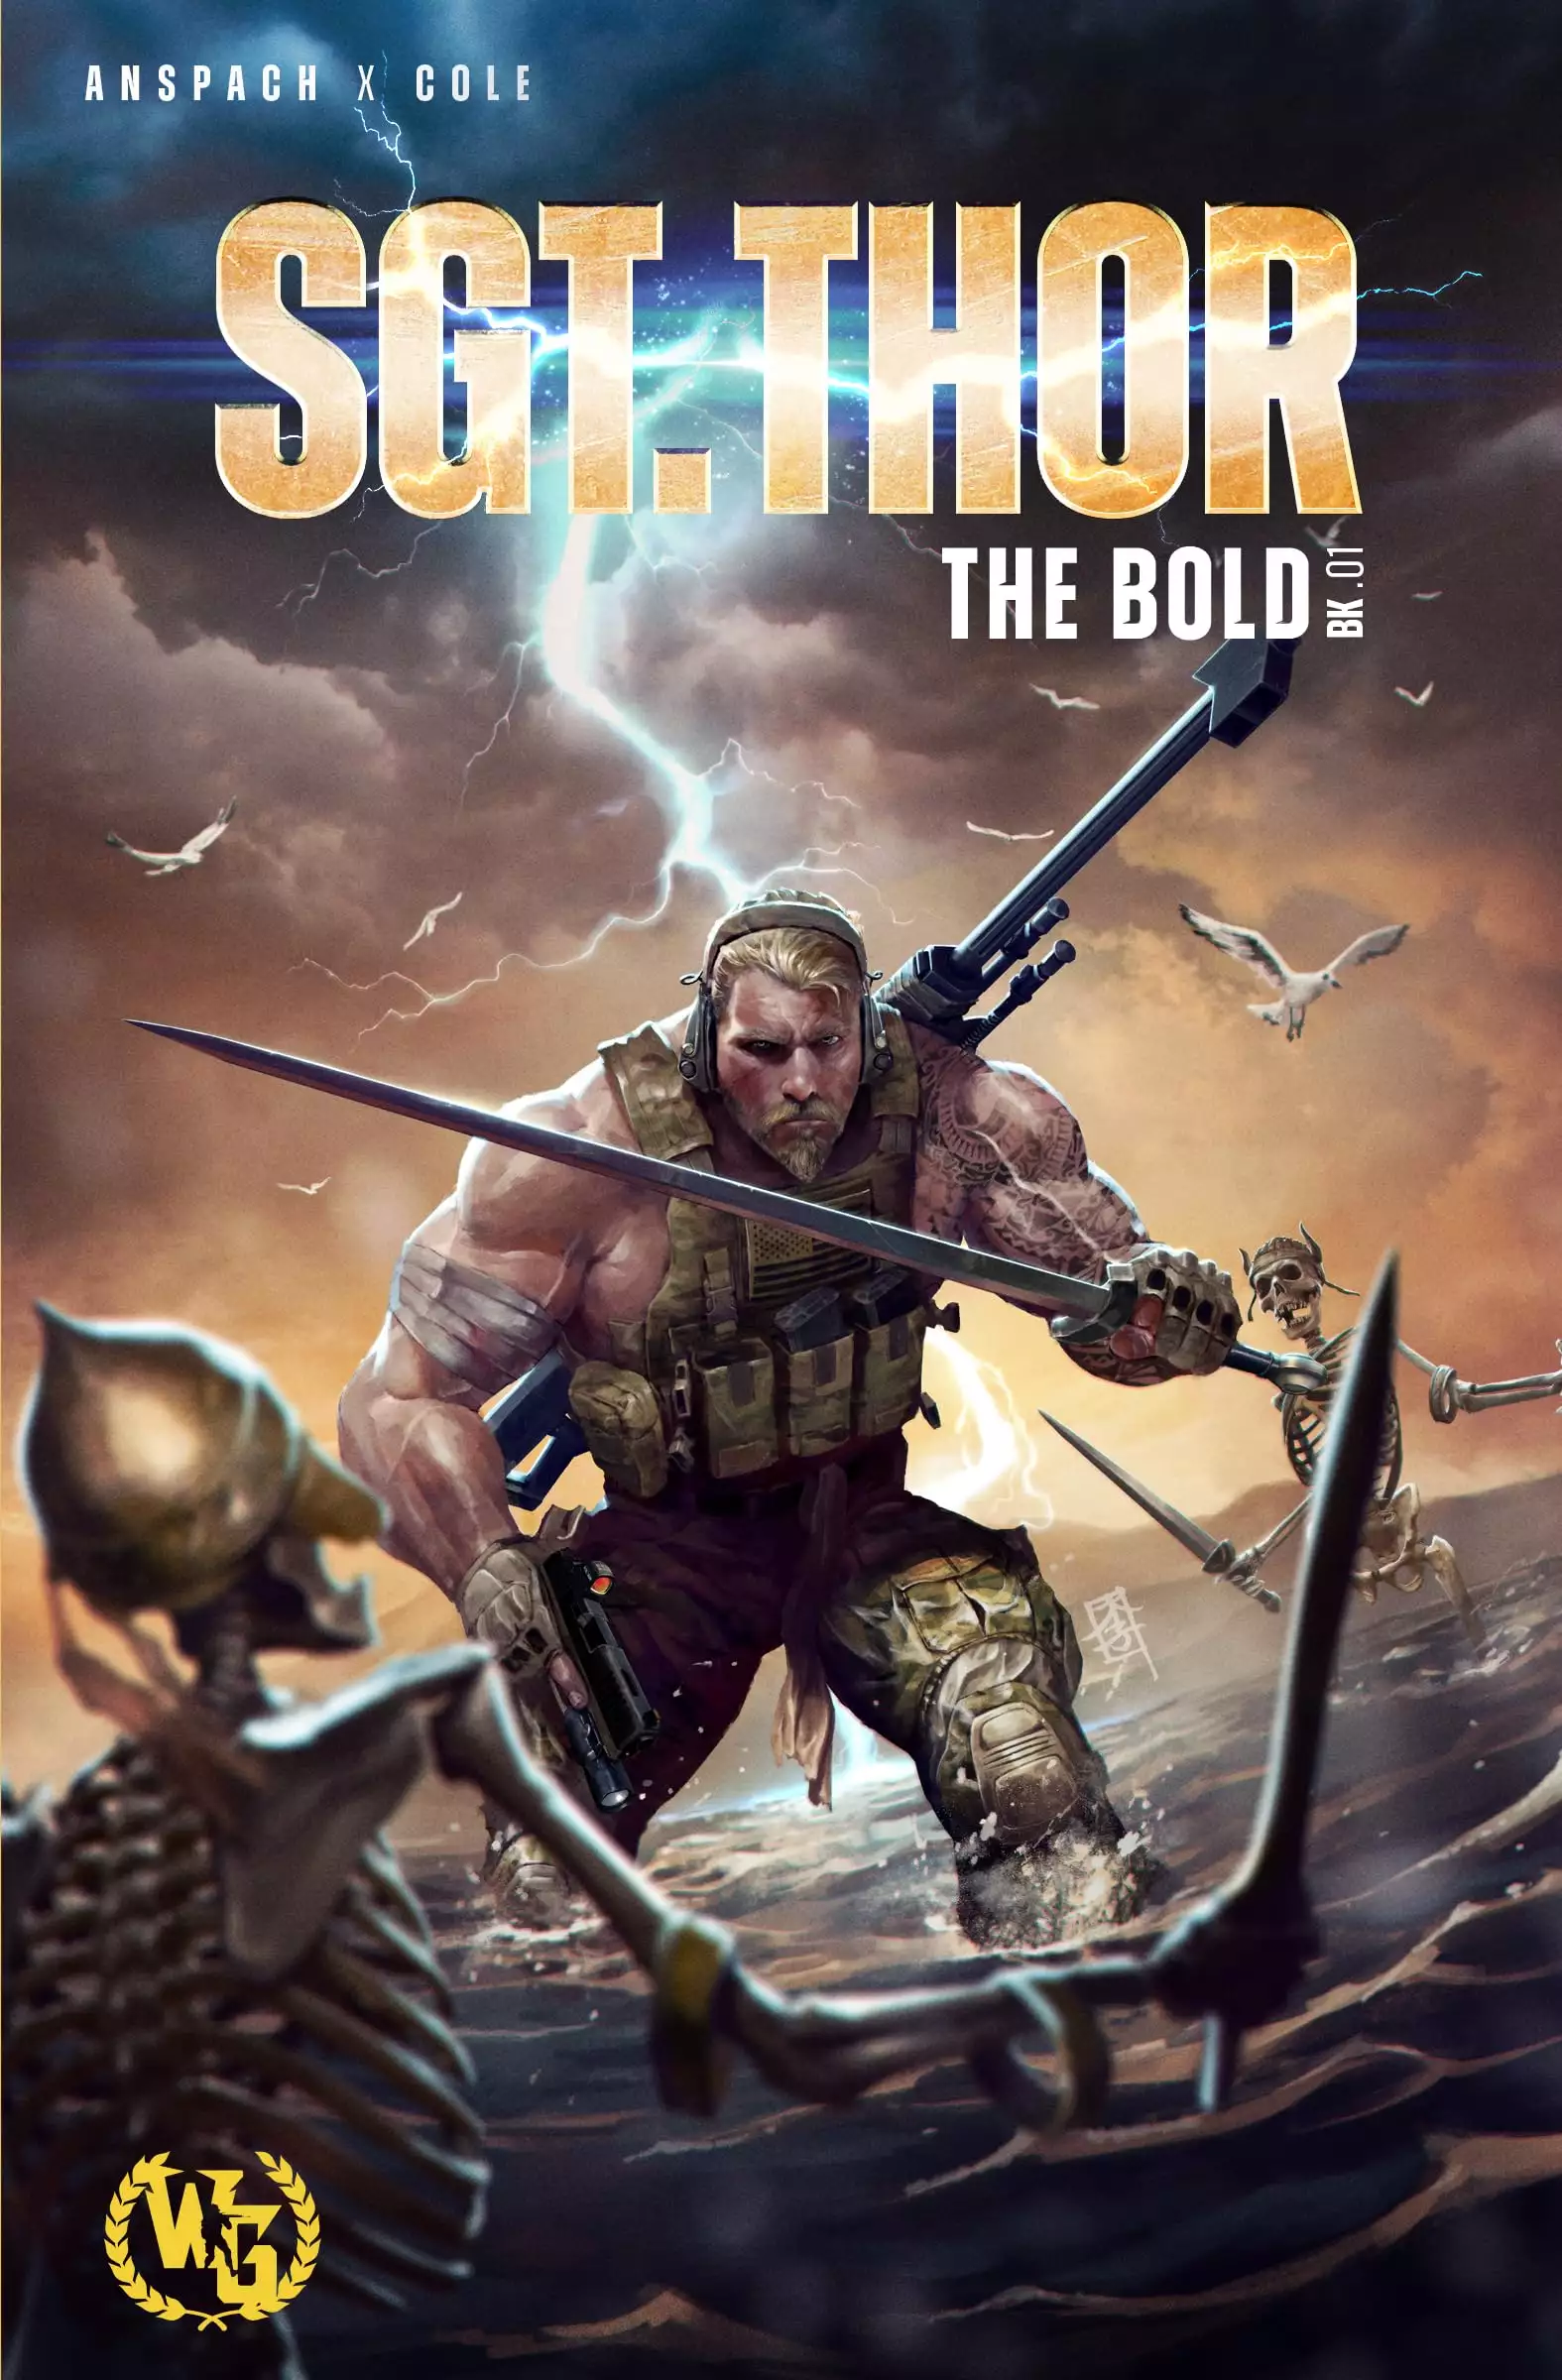 SGT. THOR the Bold: A Military Fantasy Adventure